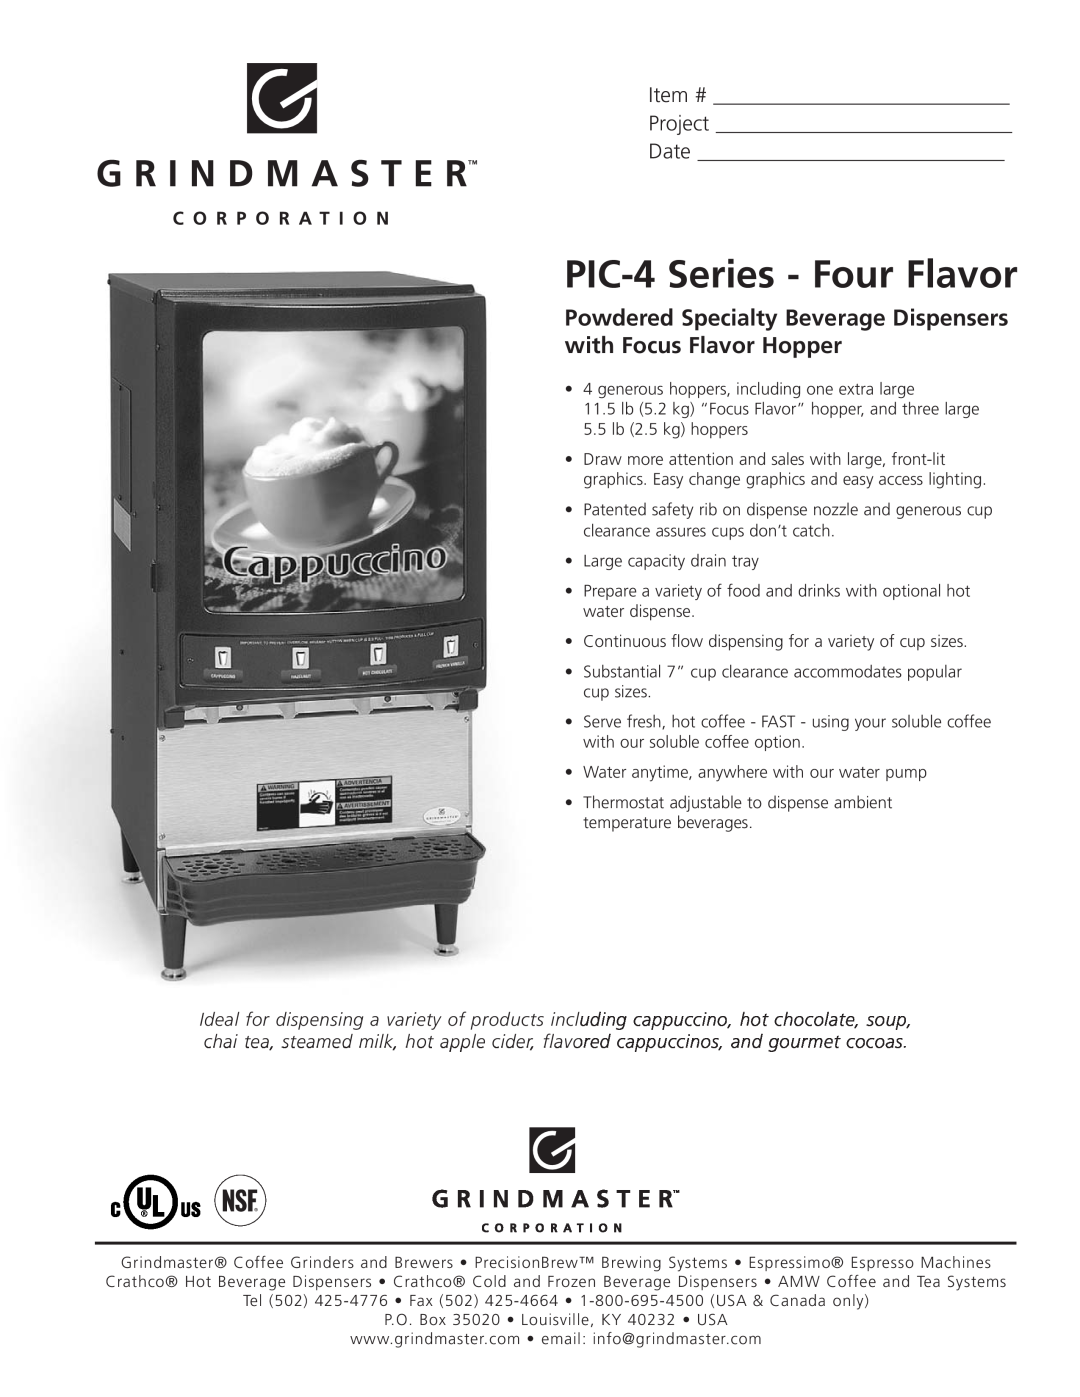 Grindmaster manual PIC-4Series - Four Flavor, Item #, Project, Date 